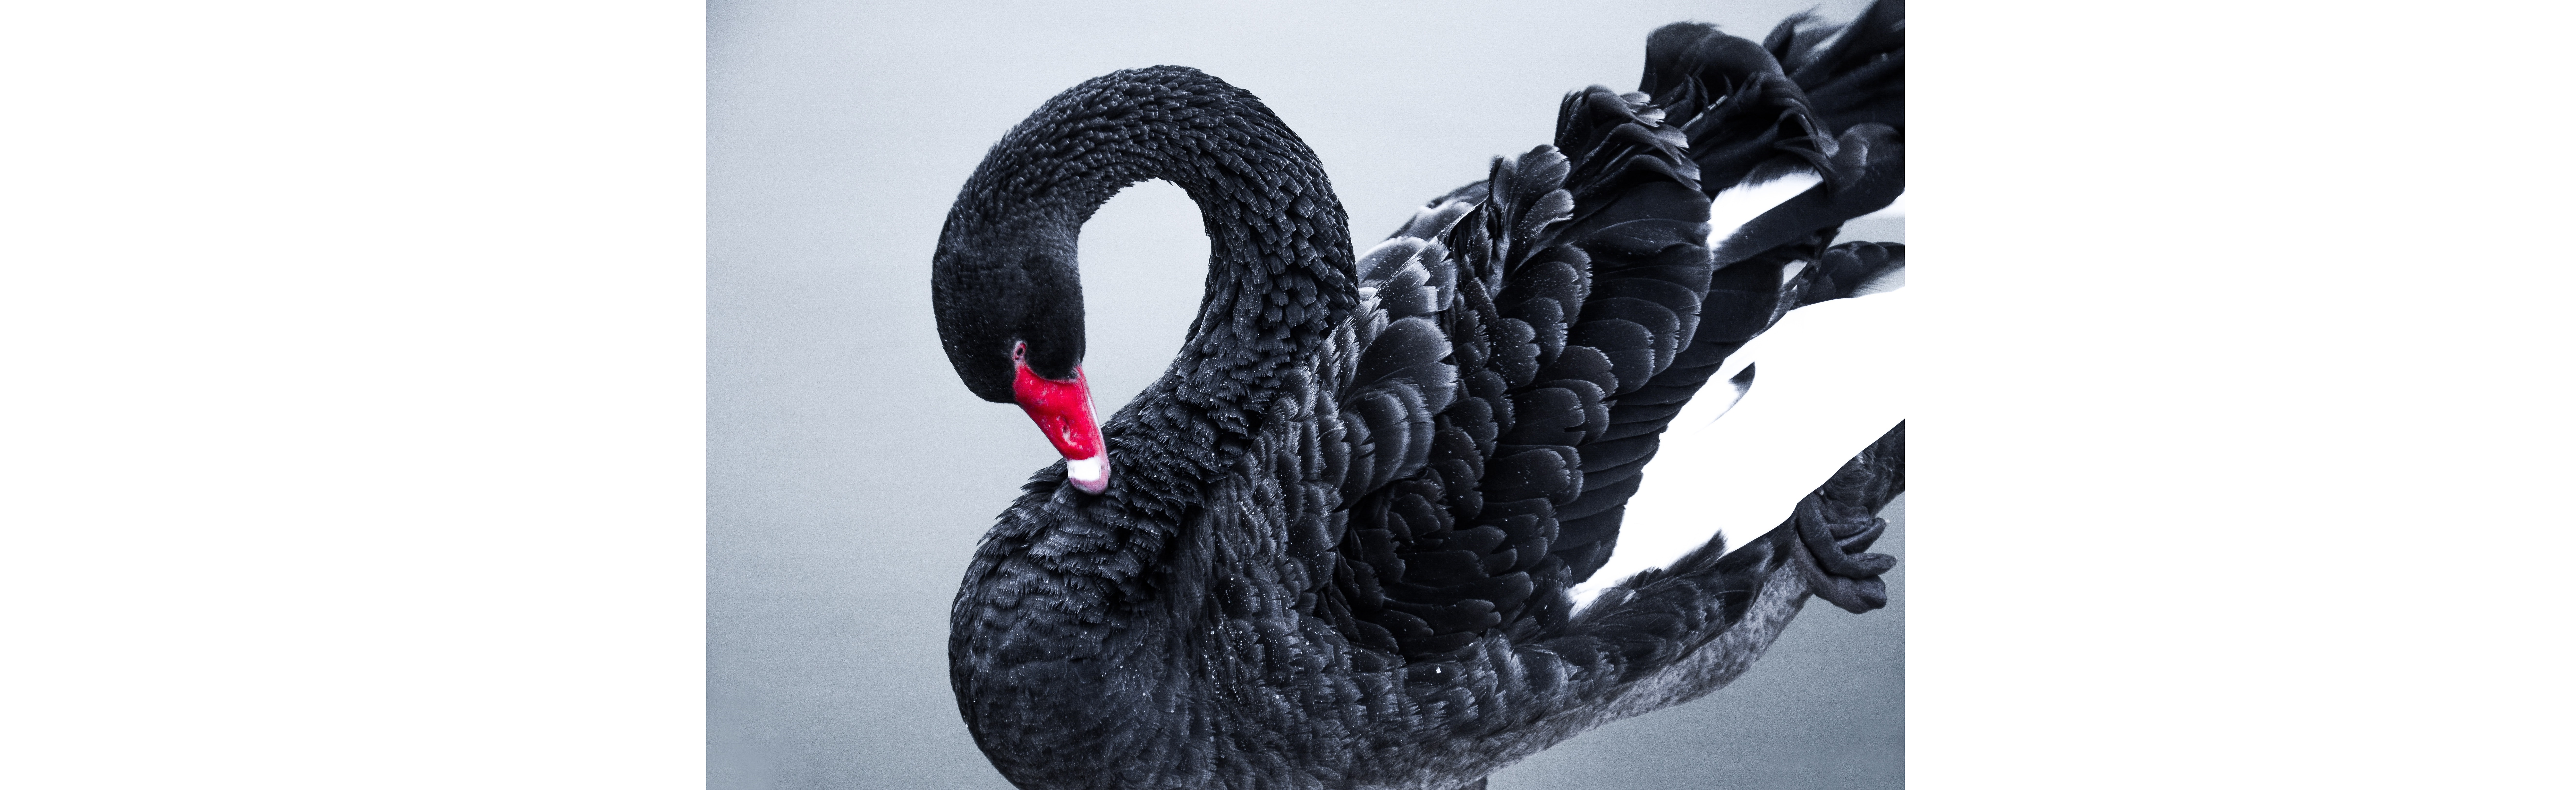 As noted by Nassim Taleb: Black swans matter - investors must be aware of the impact of unexpected events.